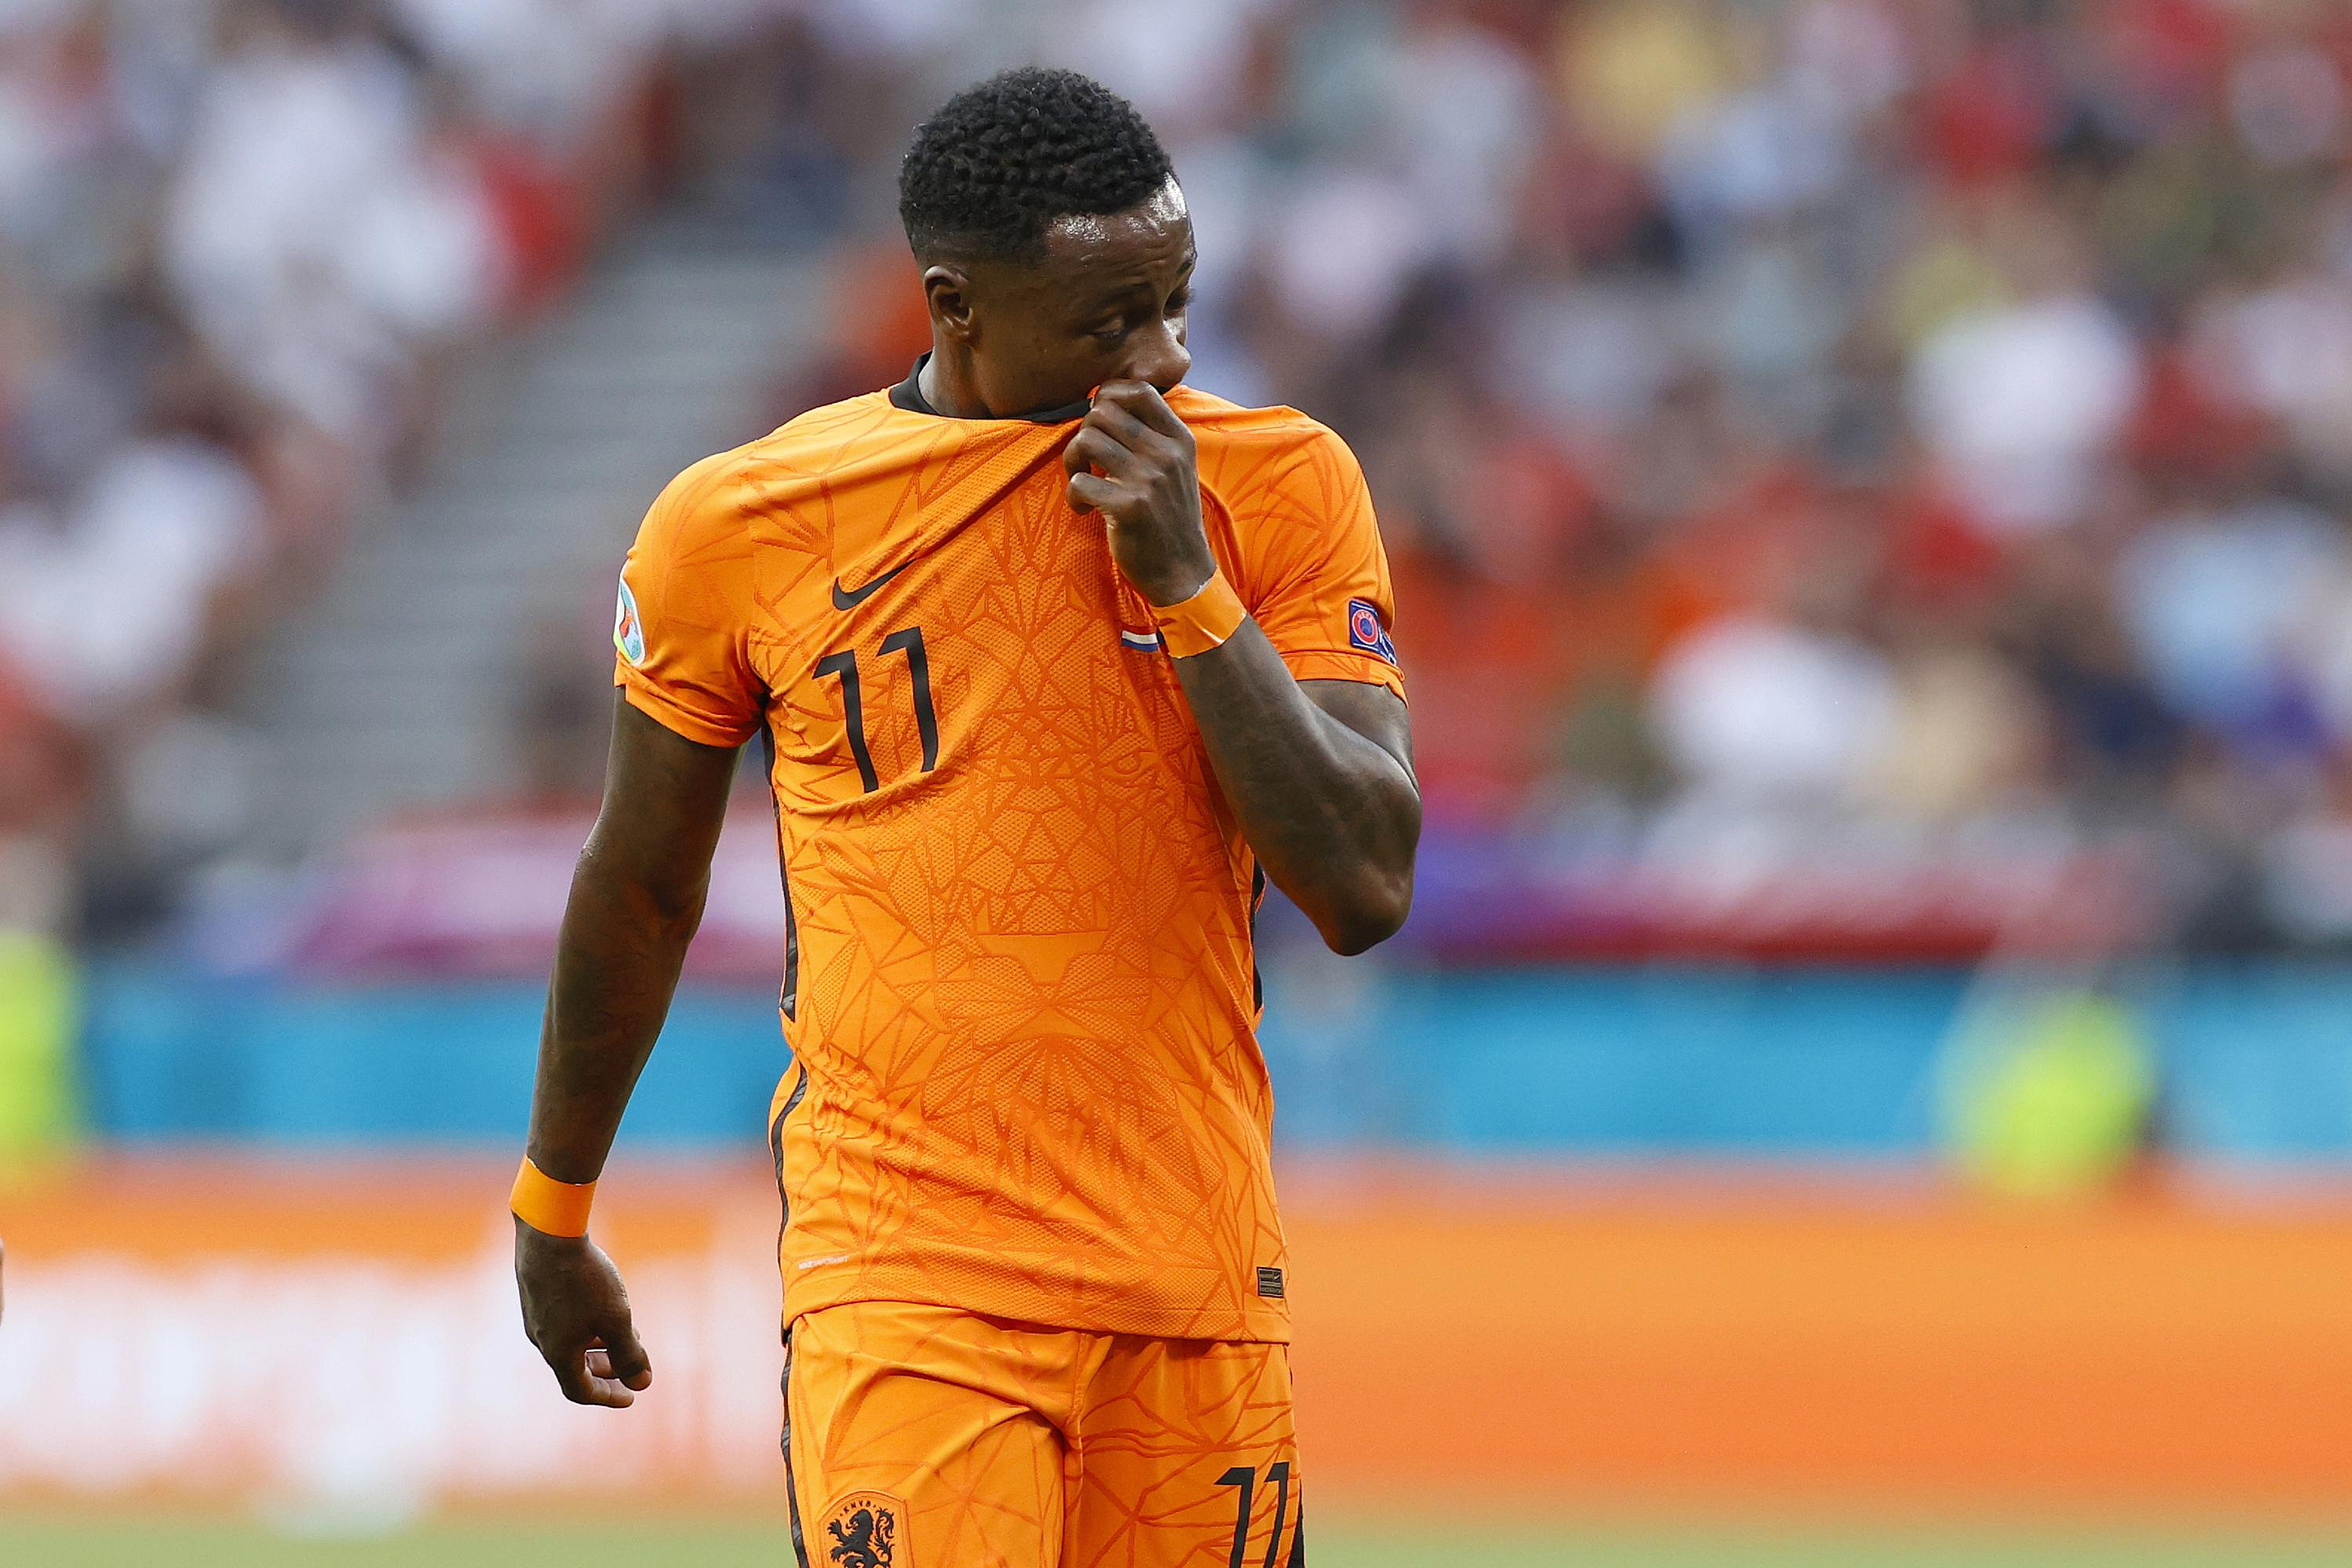 Football: Dutchman Quincy Promes sentenced again for stabbing his cousin